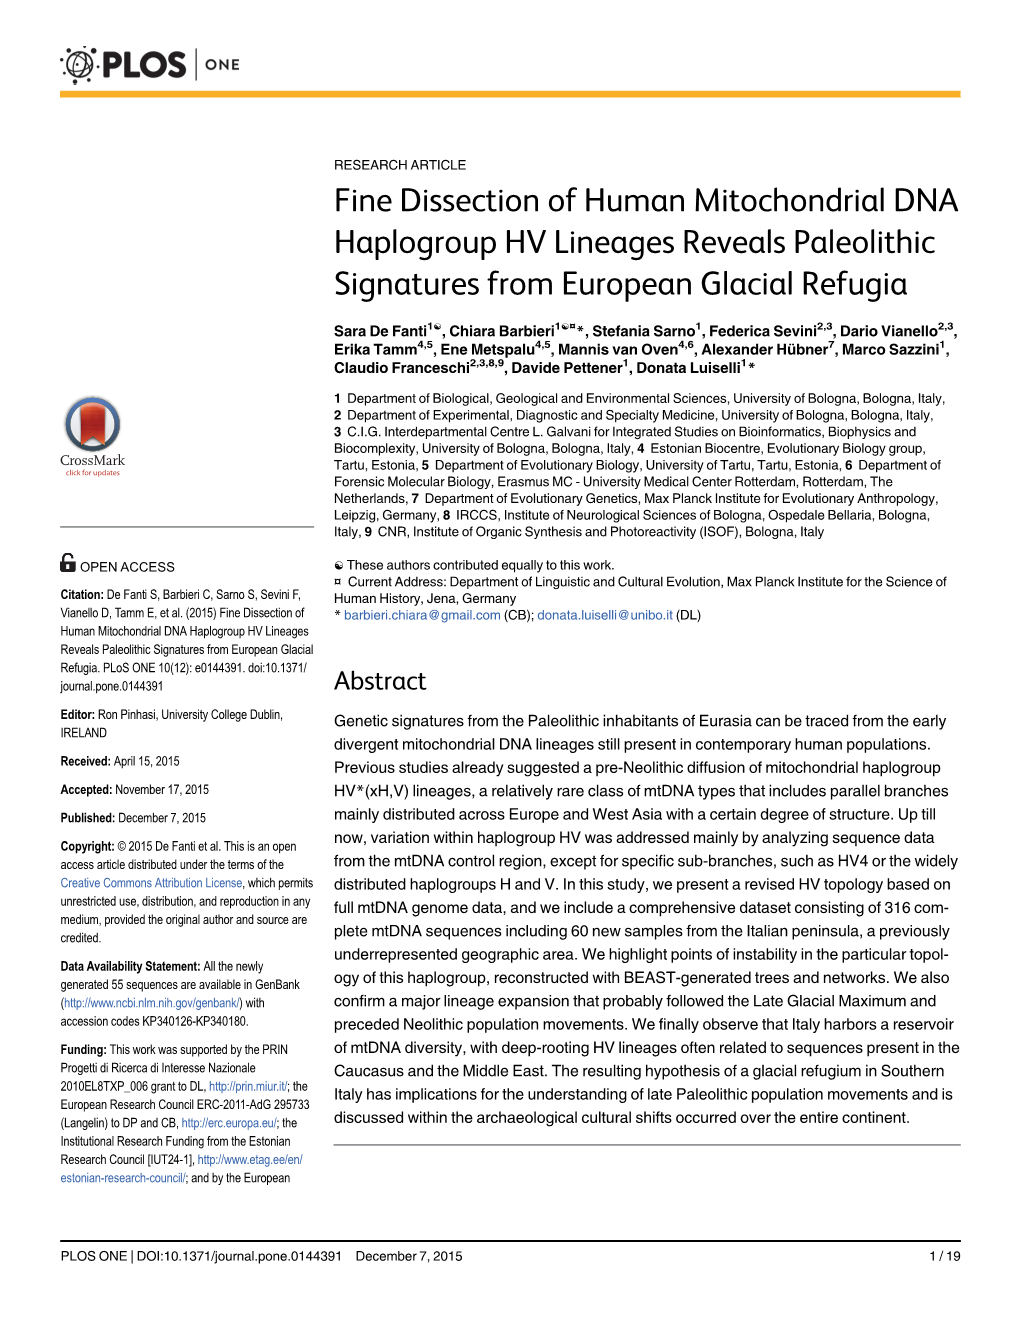 Fine Dissection of Human Mitochondrial DNA Haplogroup HV Lineages Reveals Paleolithic Signatures from European Glacial Refugia